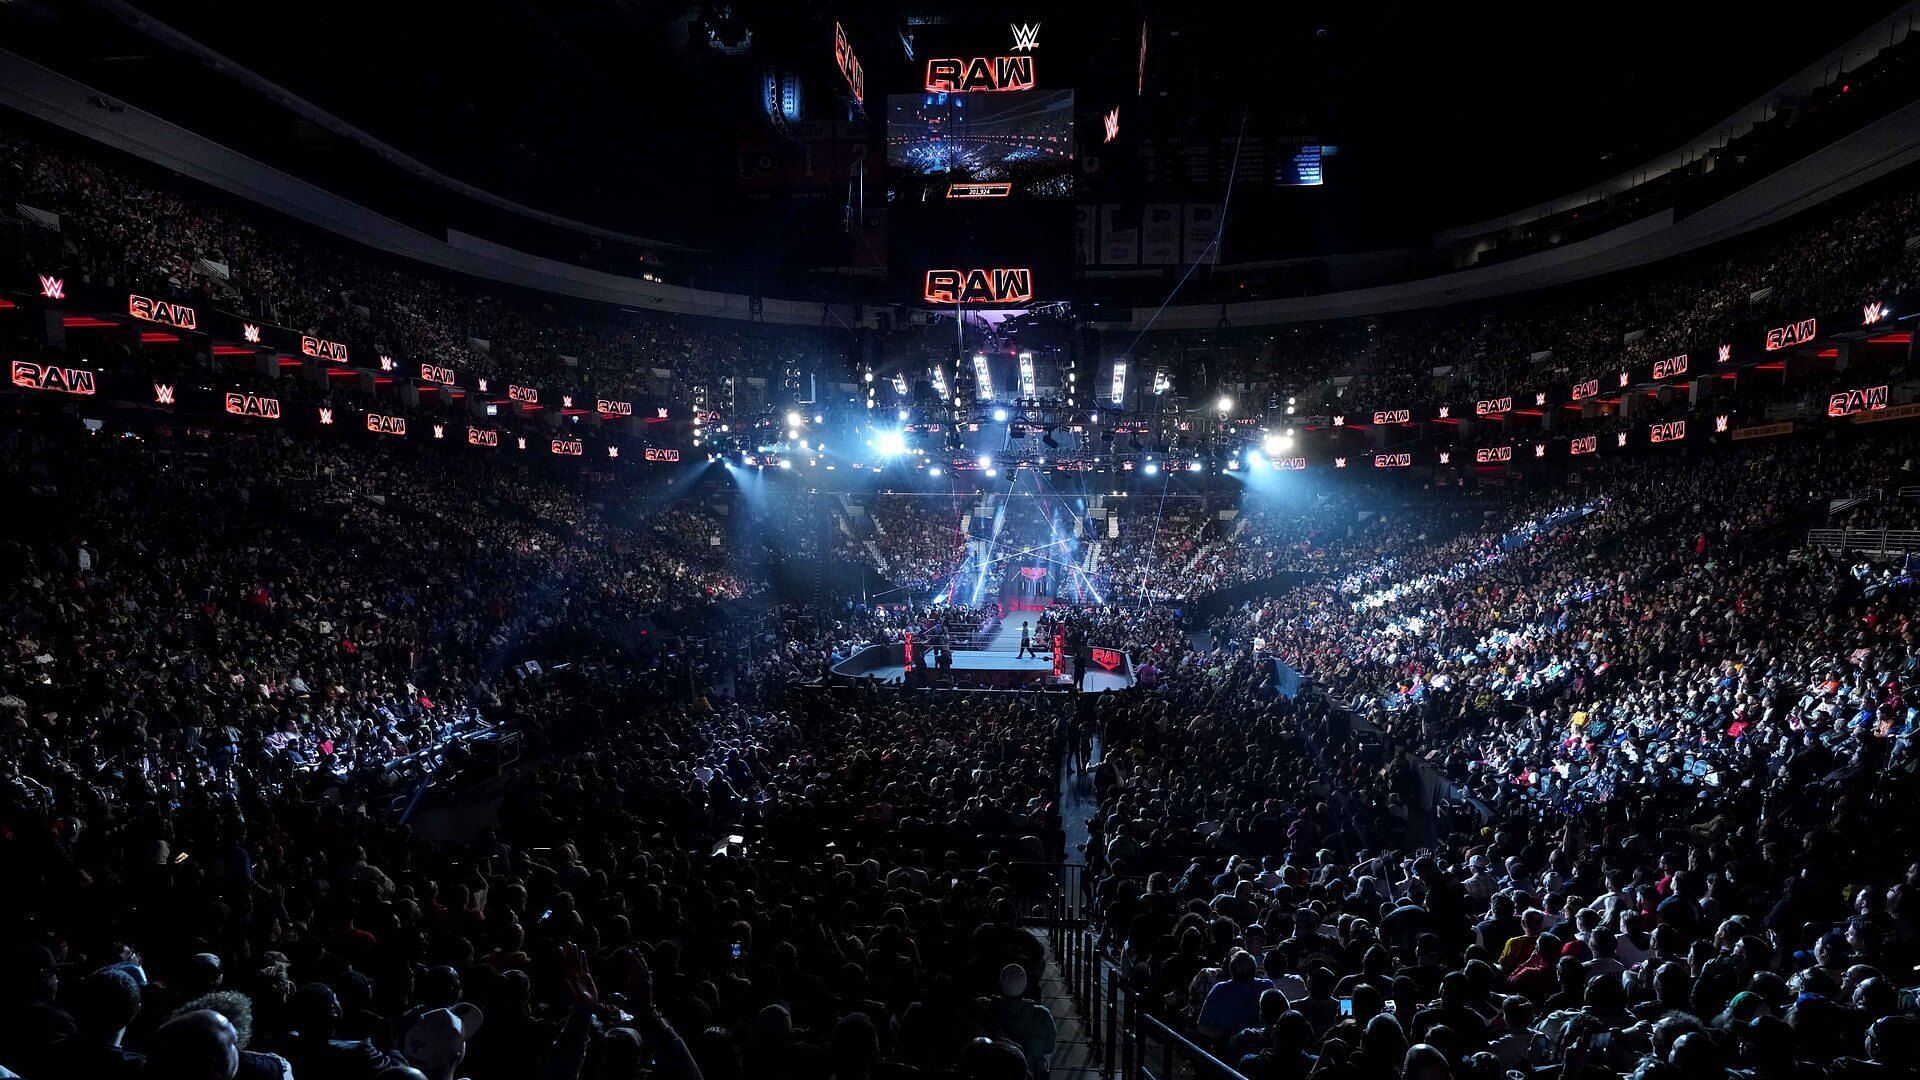 WWE Universe packs the Wells Fargo Center for the post-WrestleMania XL RAW